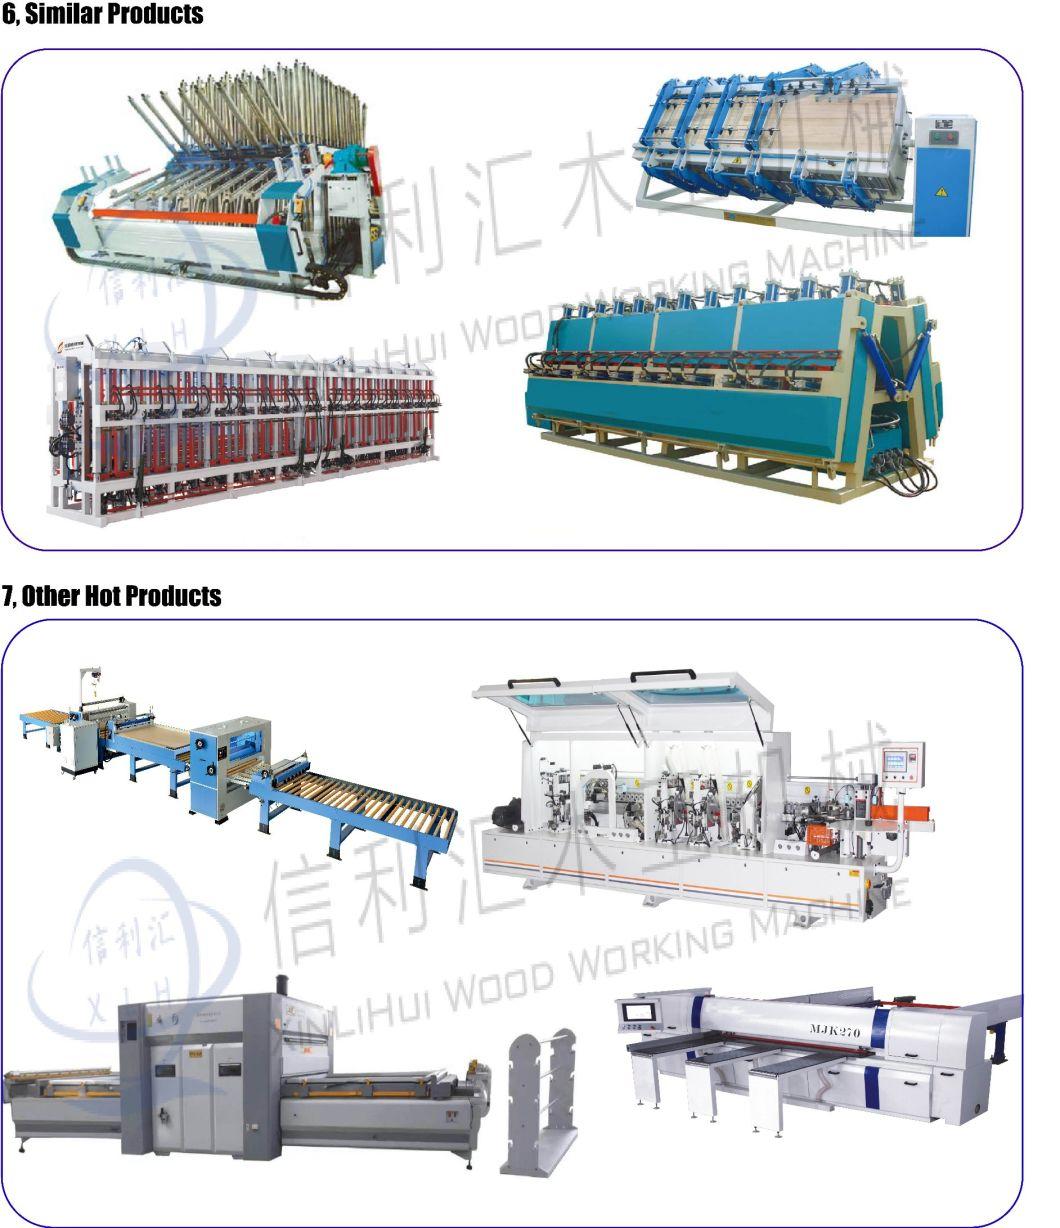 Double Sides Wood Composer Wood Board Woodworking Machine/ Hydraulic Clamp Carrier Composer/ Wood Felt-Board Machinery